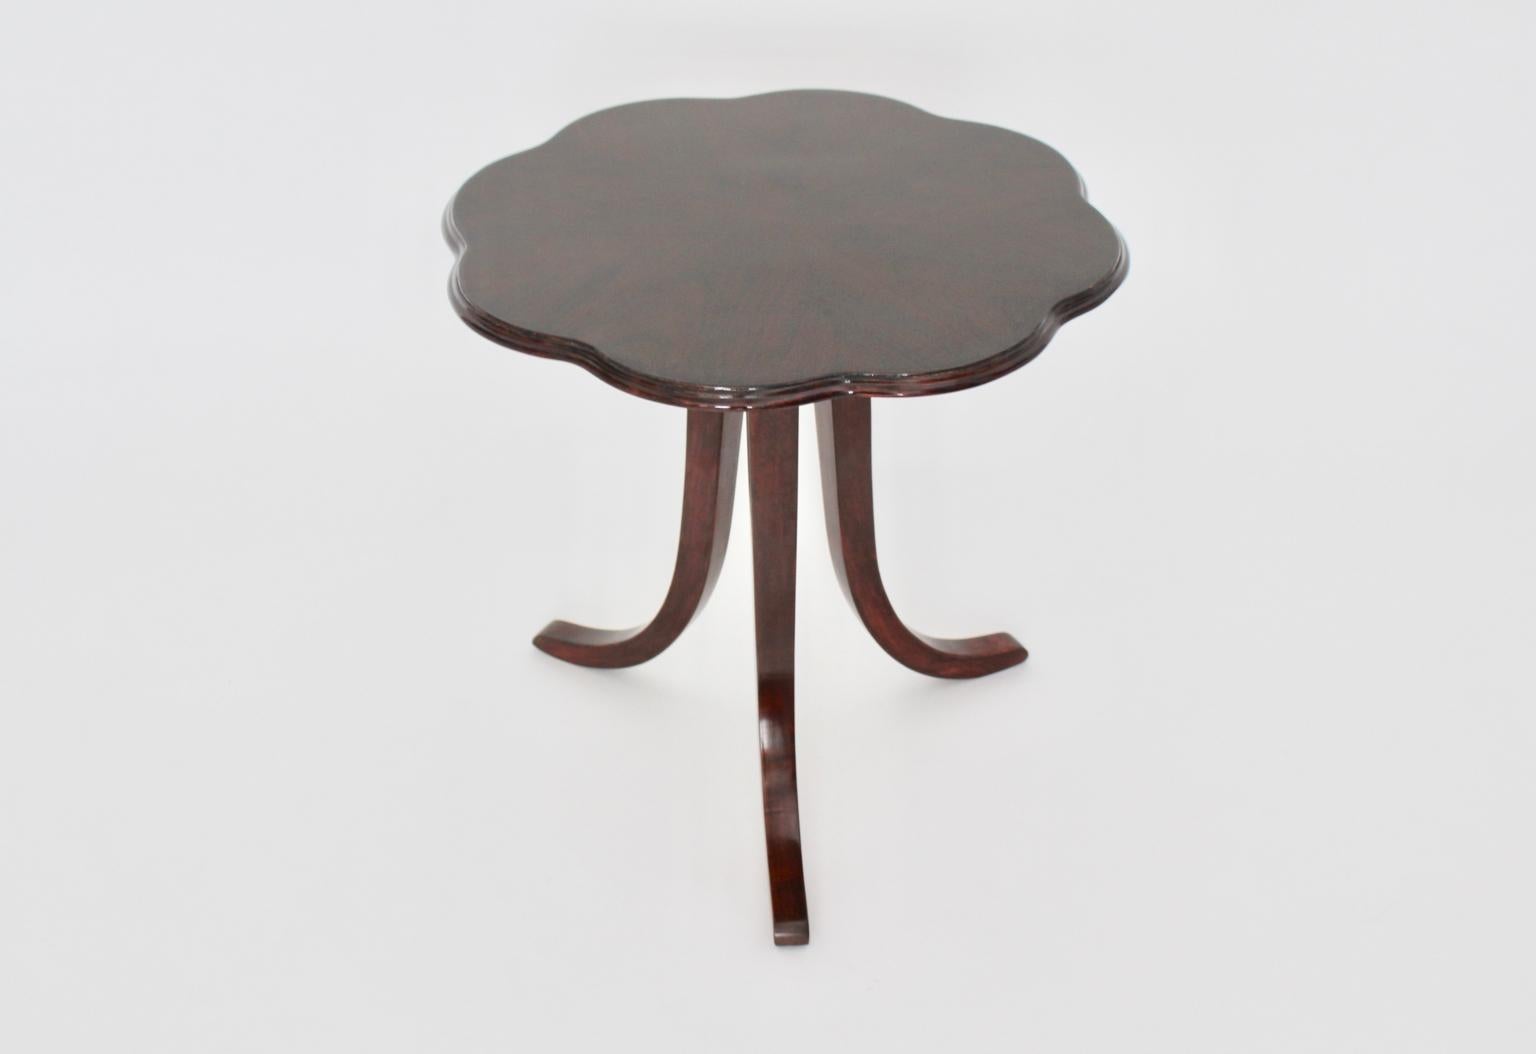 Art Deco Walnut Side Table or Coffee Table by Josef Frank for Thonet, circa 1925 For Sale 6